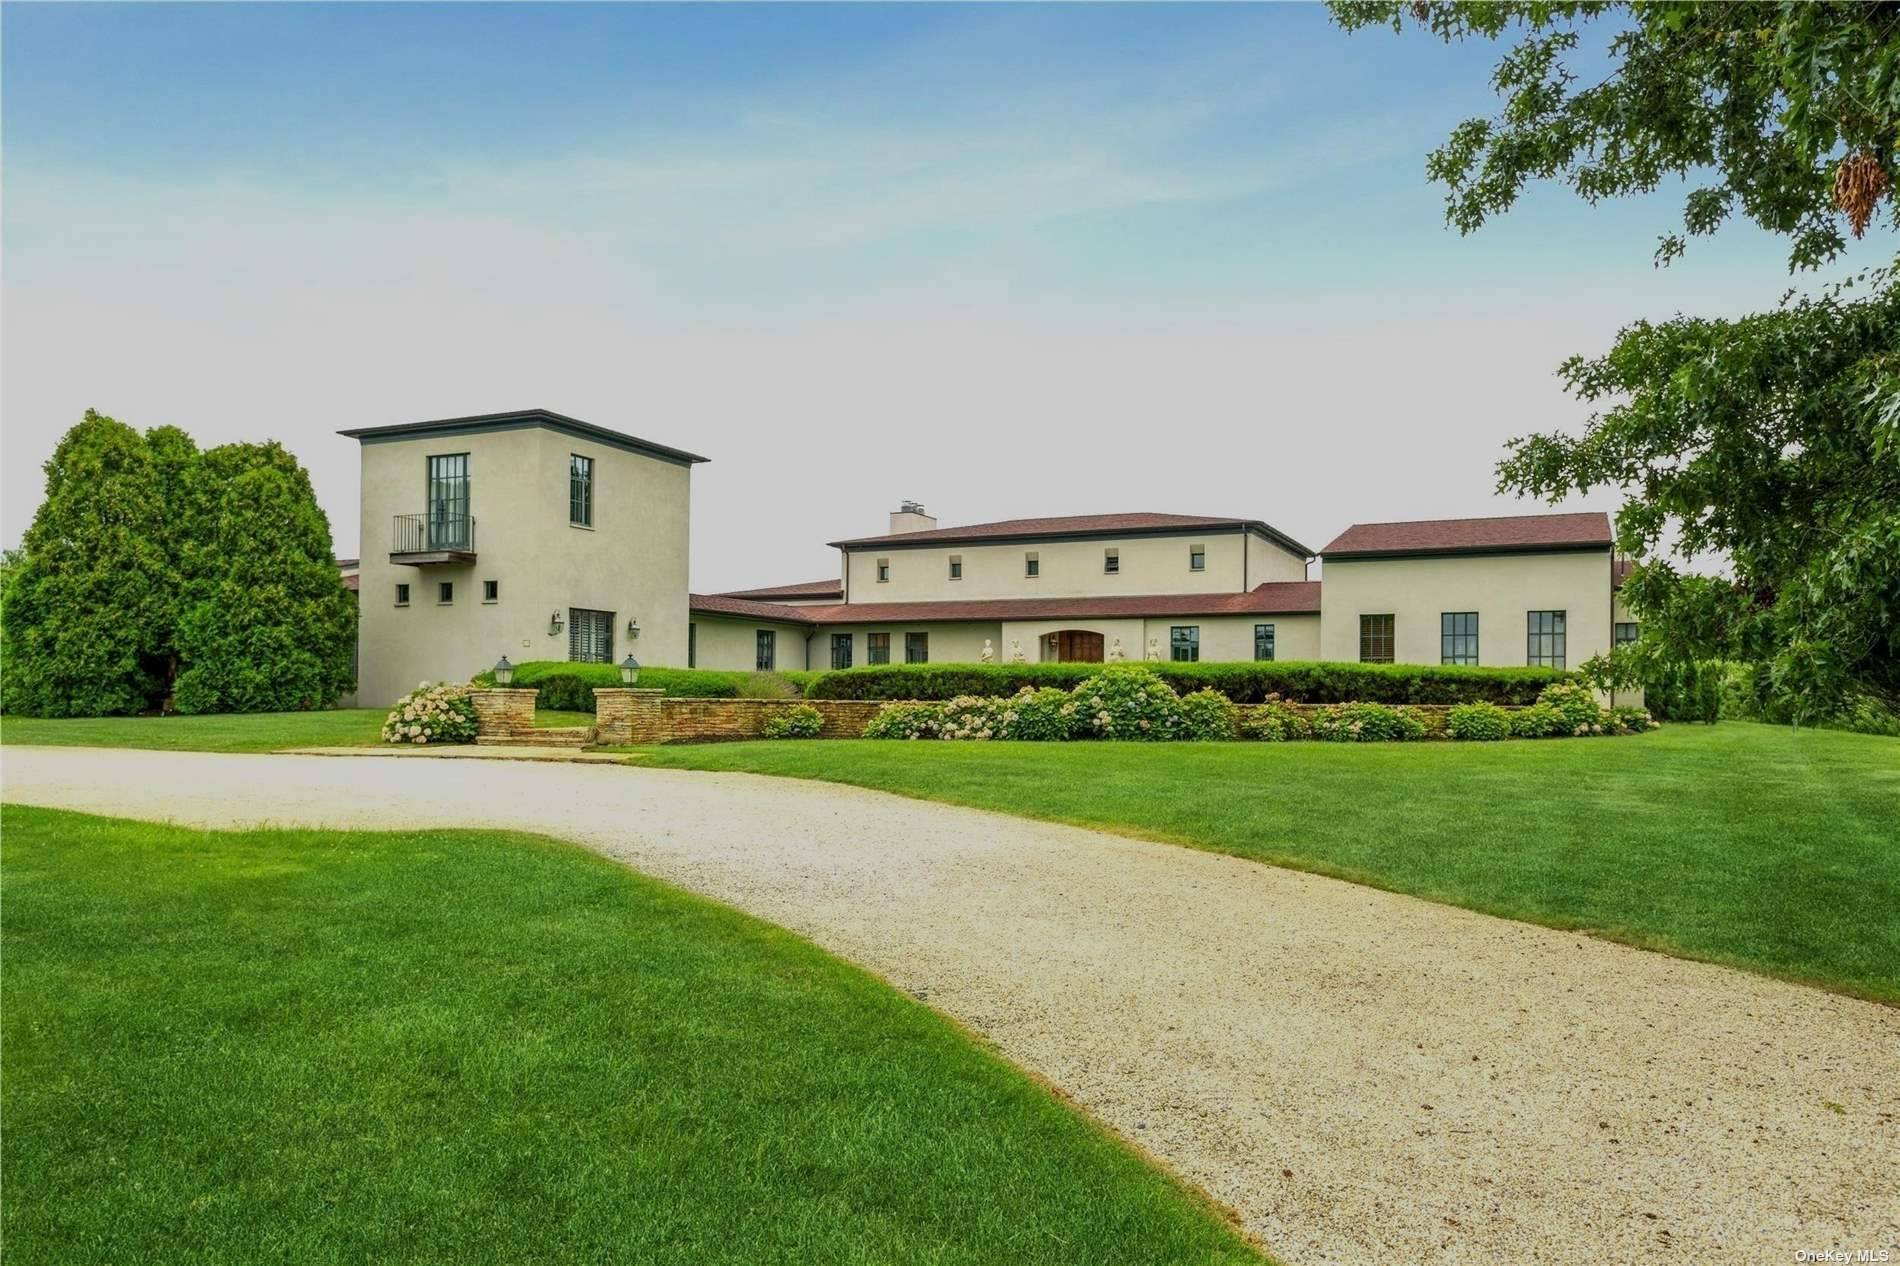 Welcome your family and friends into this beautiful Tuscan Villa style estate, located at 51 Poxabogue Lane in Sagaponack, and you will be whisked away into a home that exemplifies ...